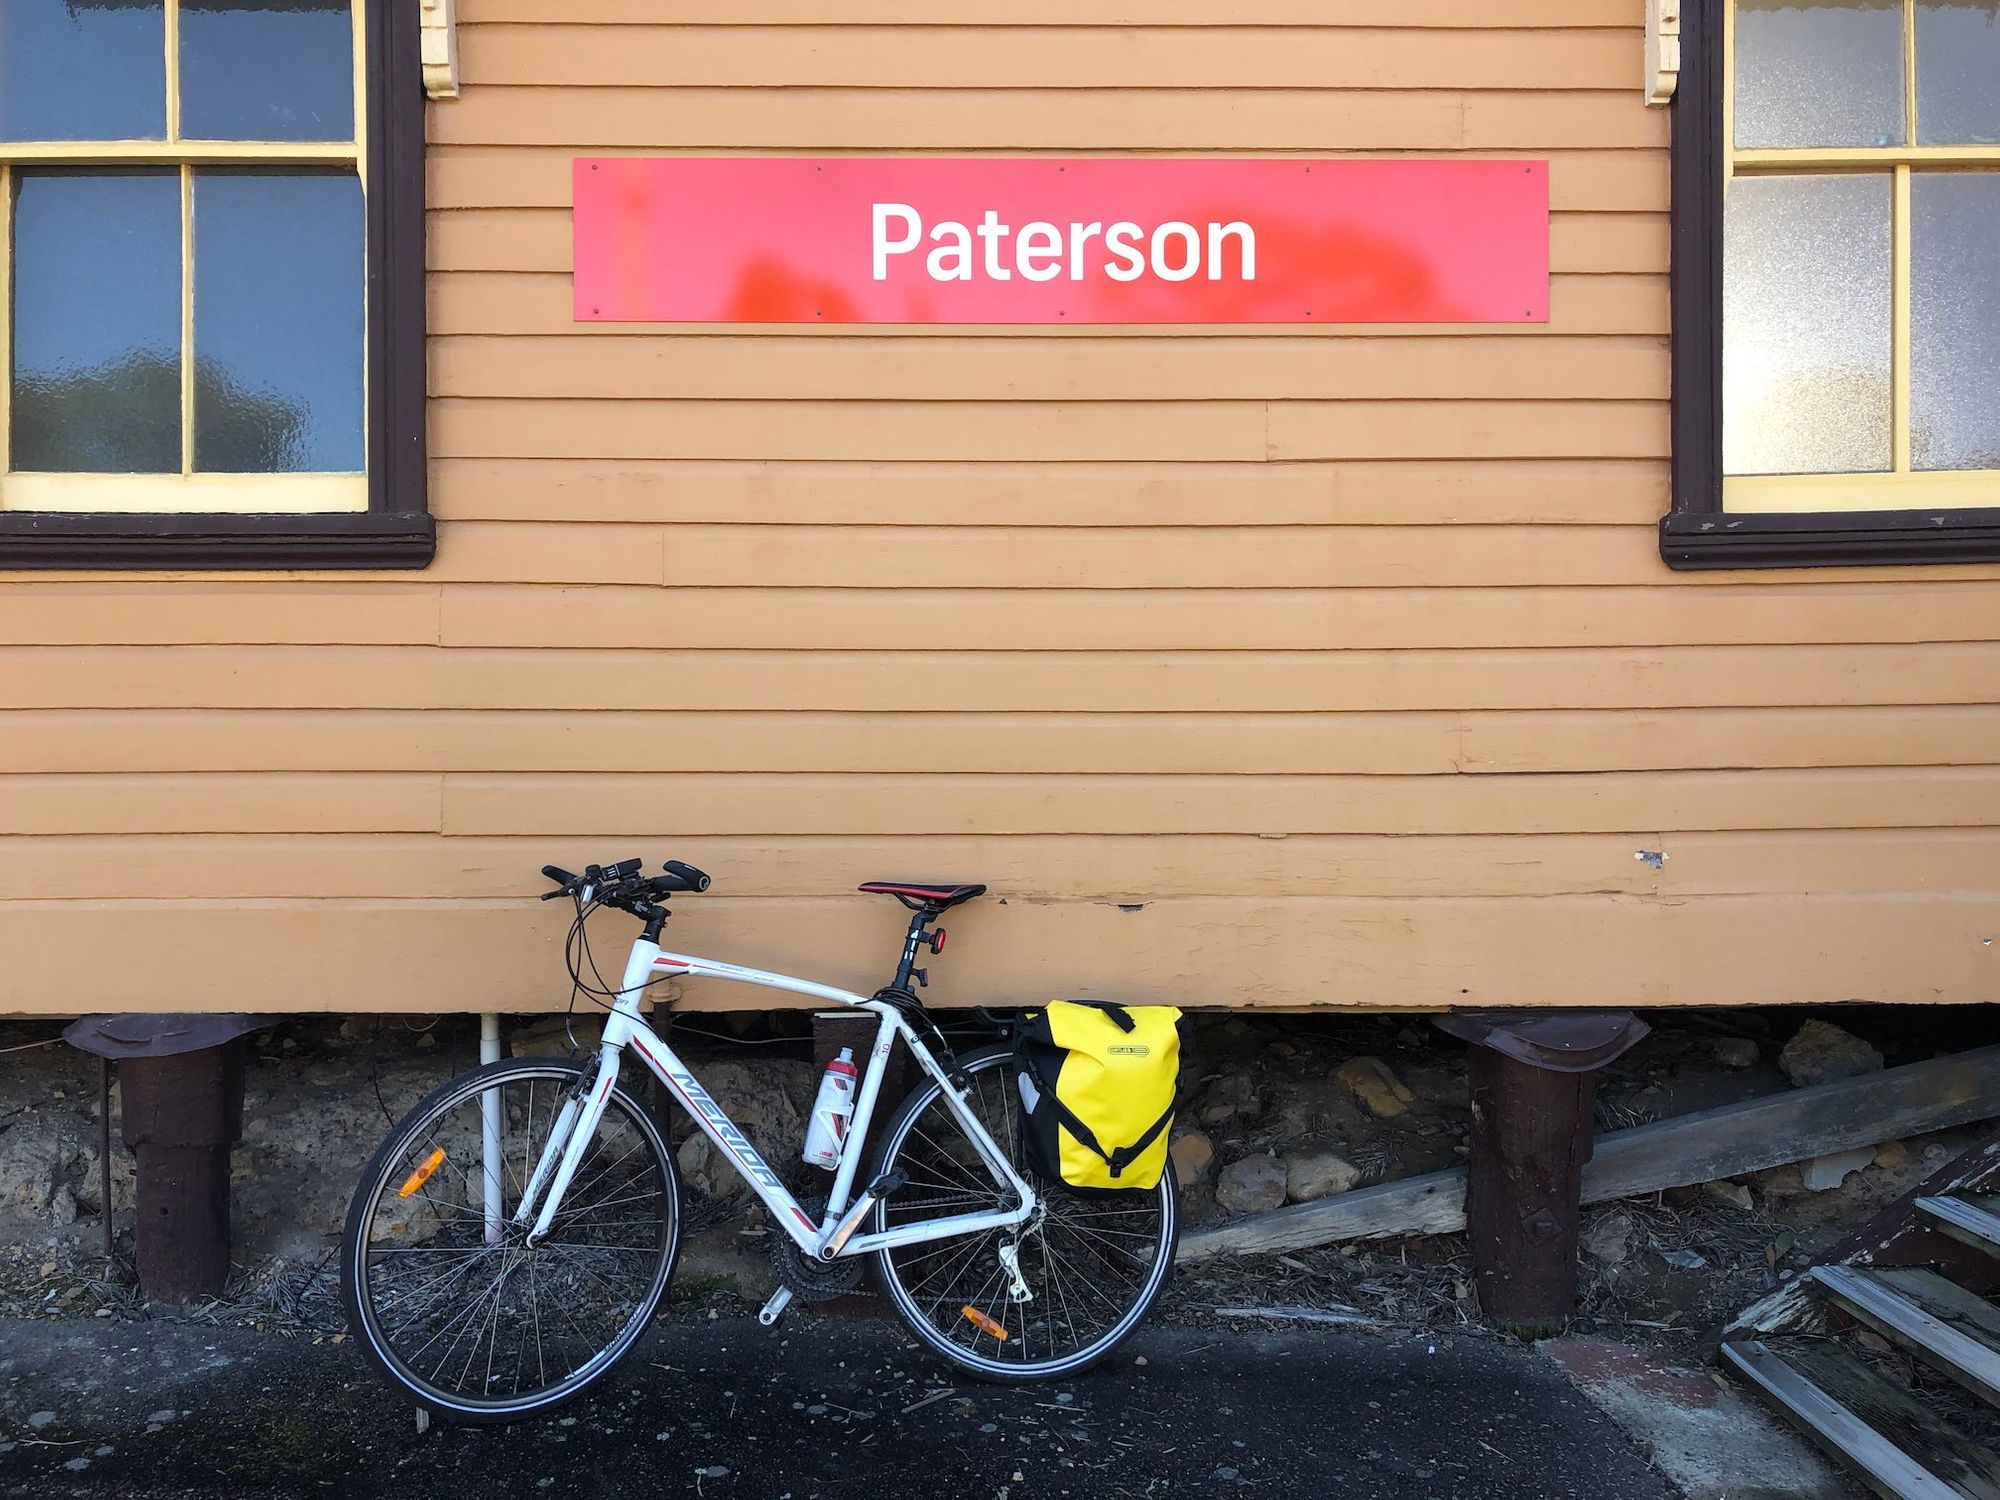 Bicycle with panniers, in front of wooden train station building, labelled "Paterson"